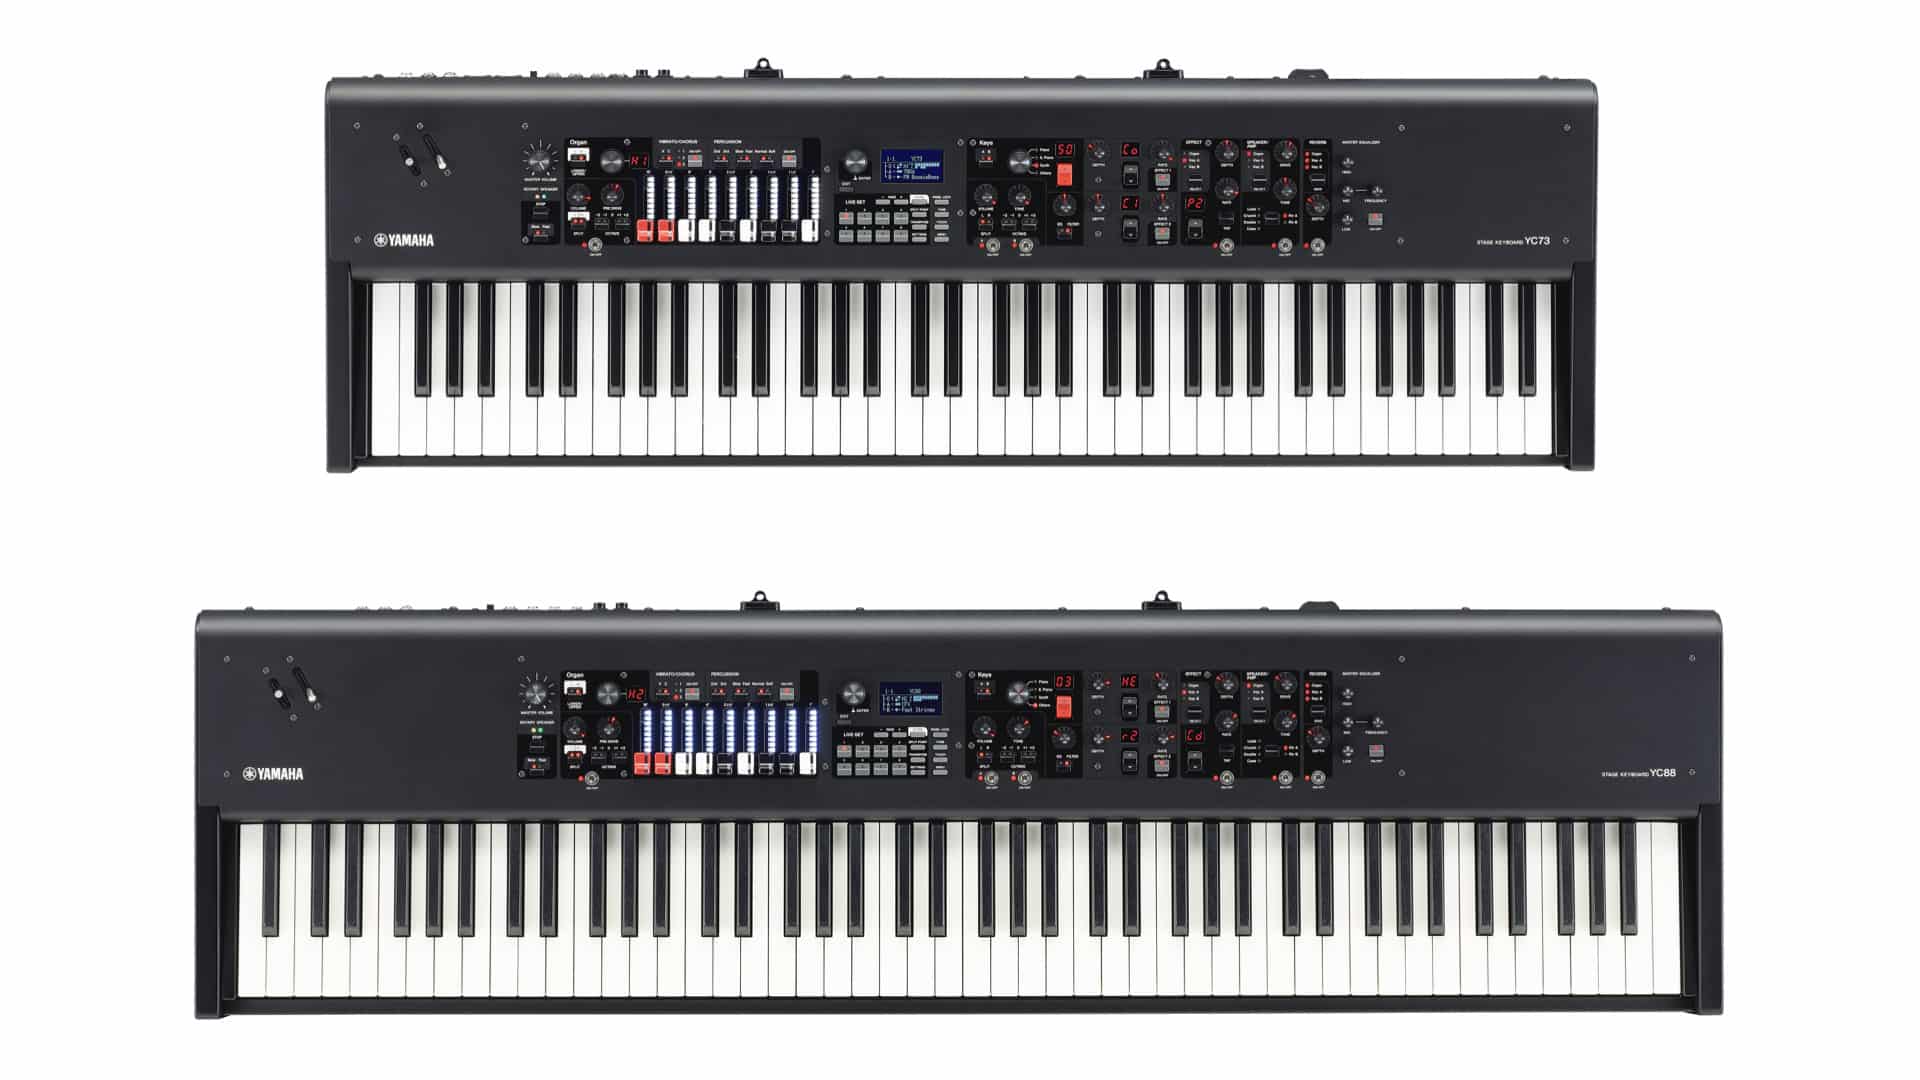 Me gusta Barcelona Grave Yamaha Introduces The Versatile New YC73 and YC88 Stage Keyboards -  American Songwriter